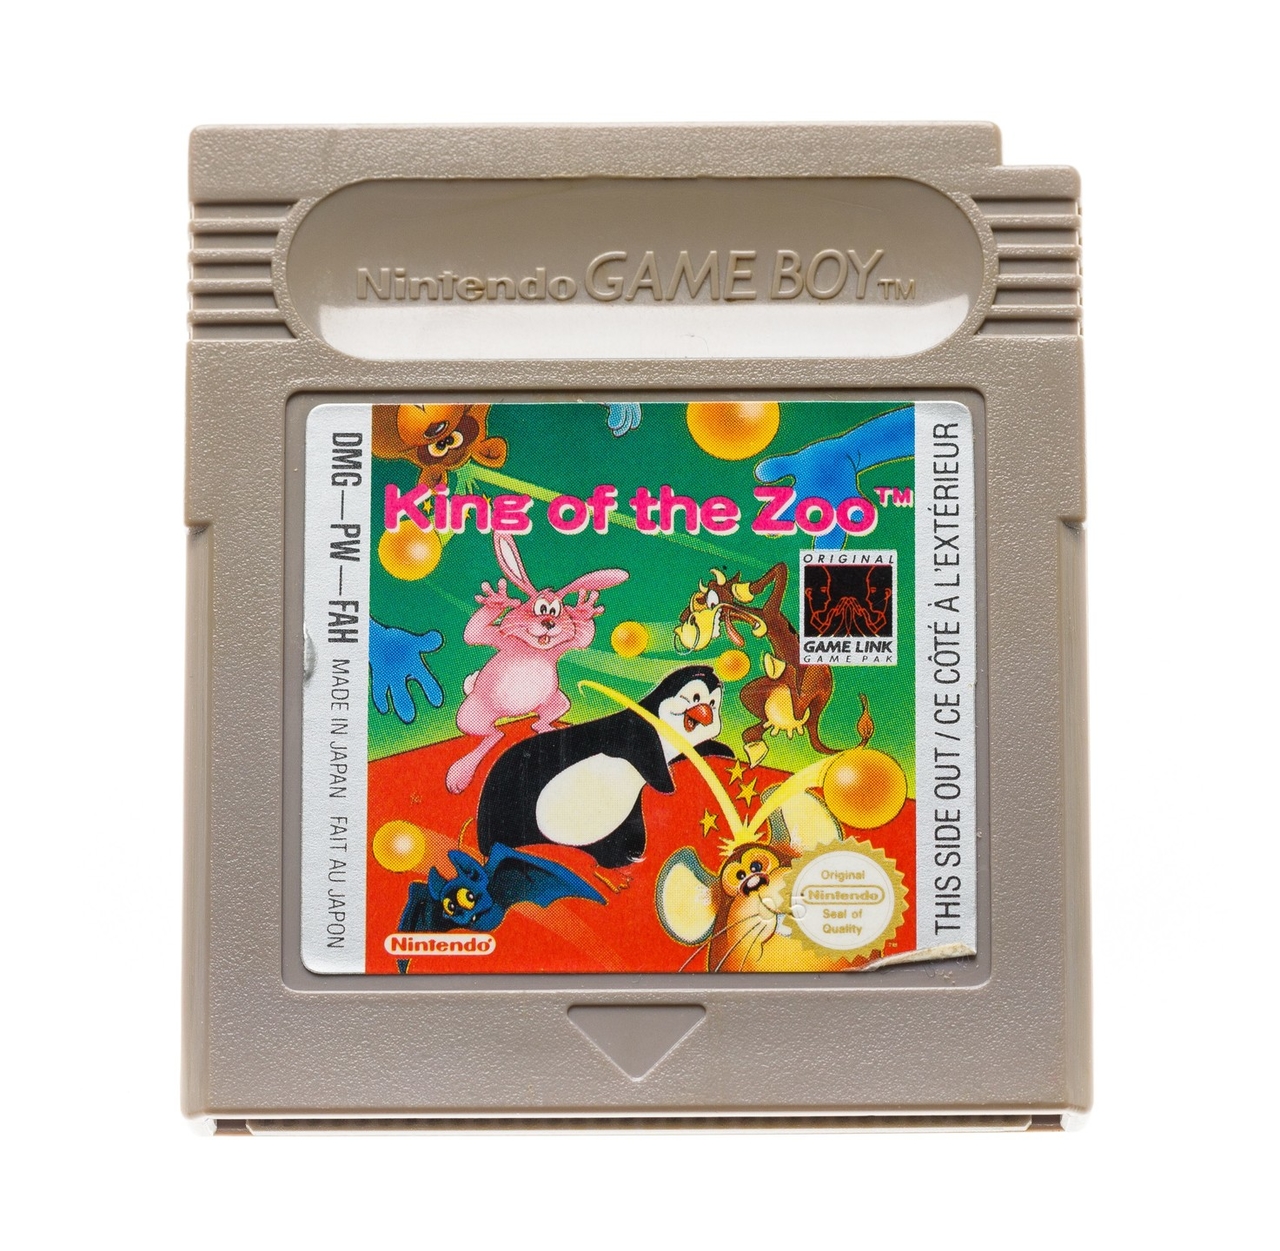 King of the Zoo - Gameboy Classic Games